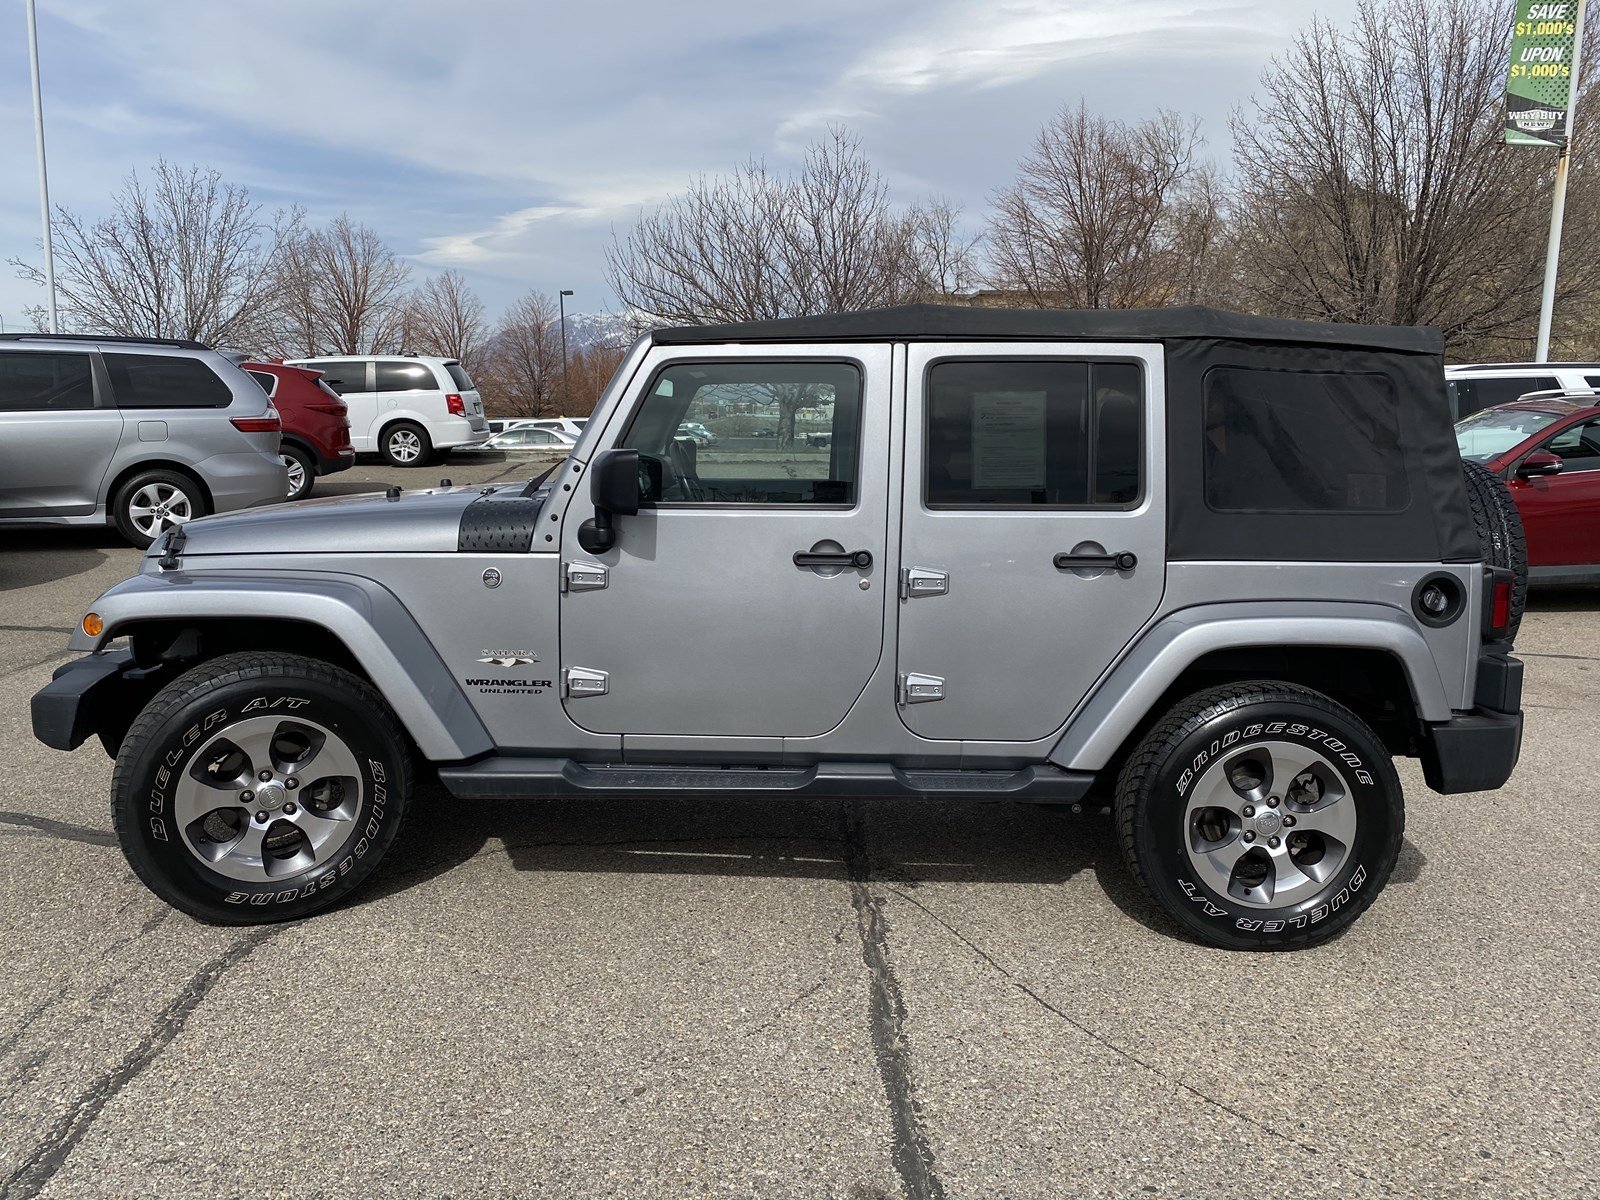 PreOwned 2017 Jeep Wrangler Unlimited Sahara Convertible